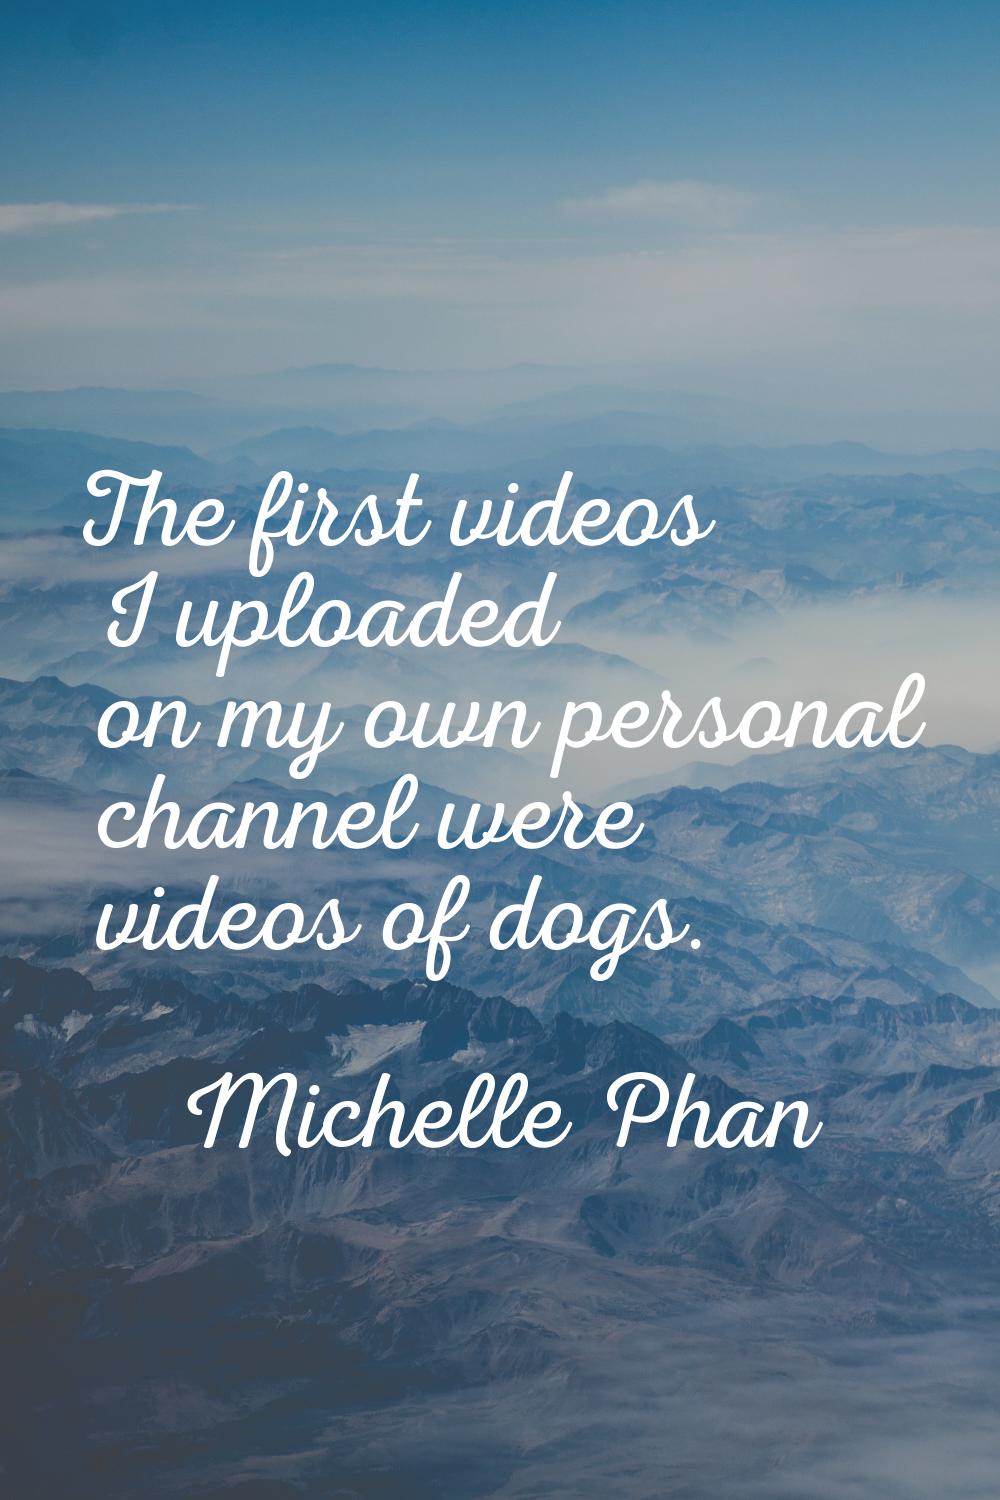 The first videos I uploaded on my own personal channel were videos of dogs.